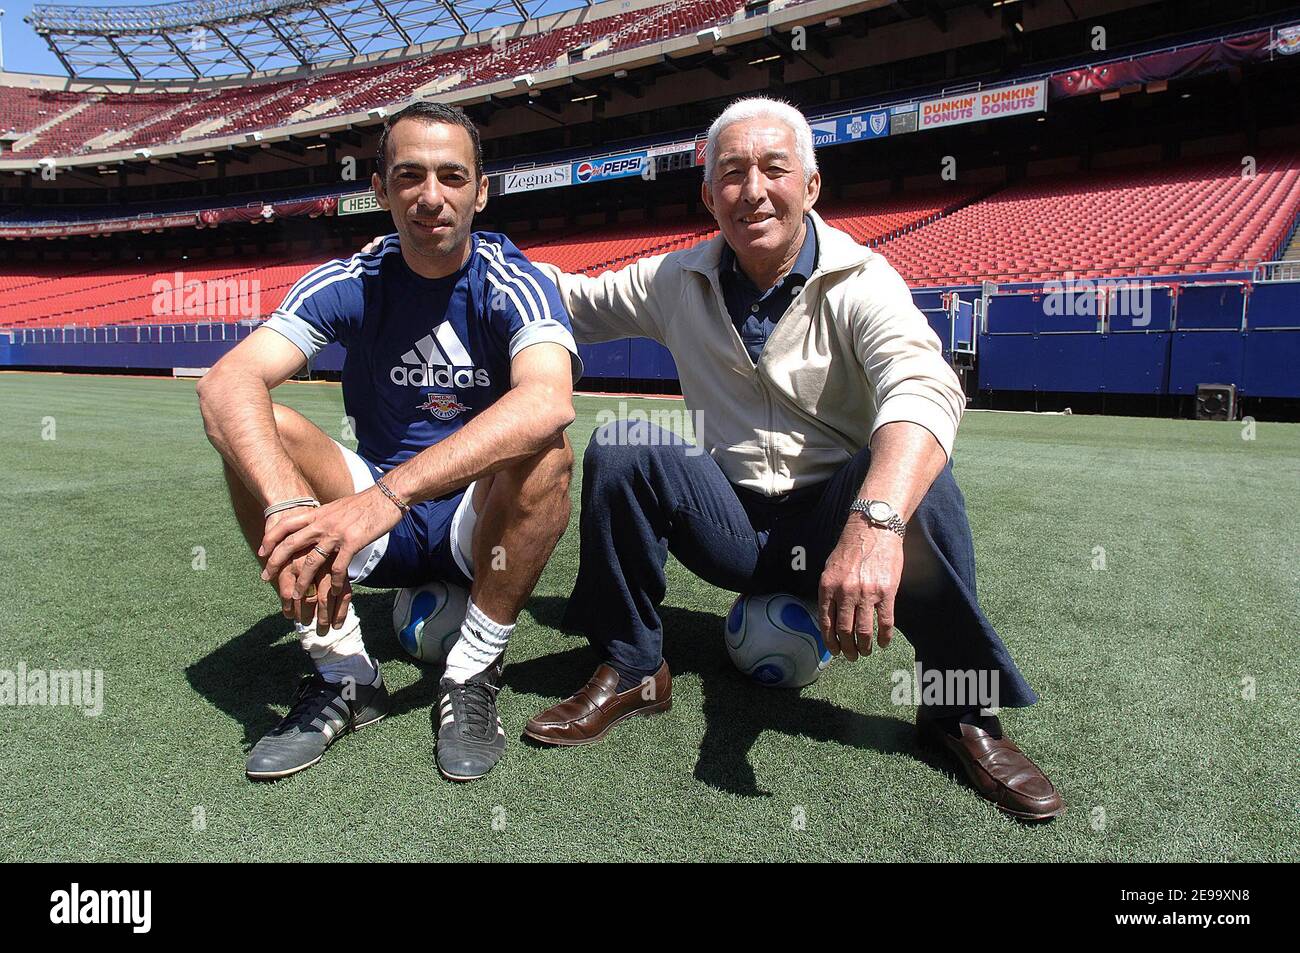 Former French soccer player Jean Djorkaeff attends a training session of  his son Soccer star Youri Djorkaeff in New -York city Wednesday 19 April  2006. Djorkaeff is now playing for the New